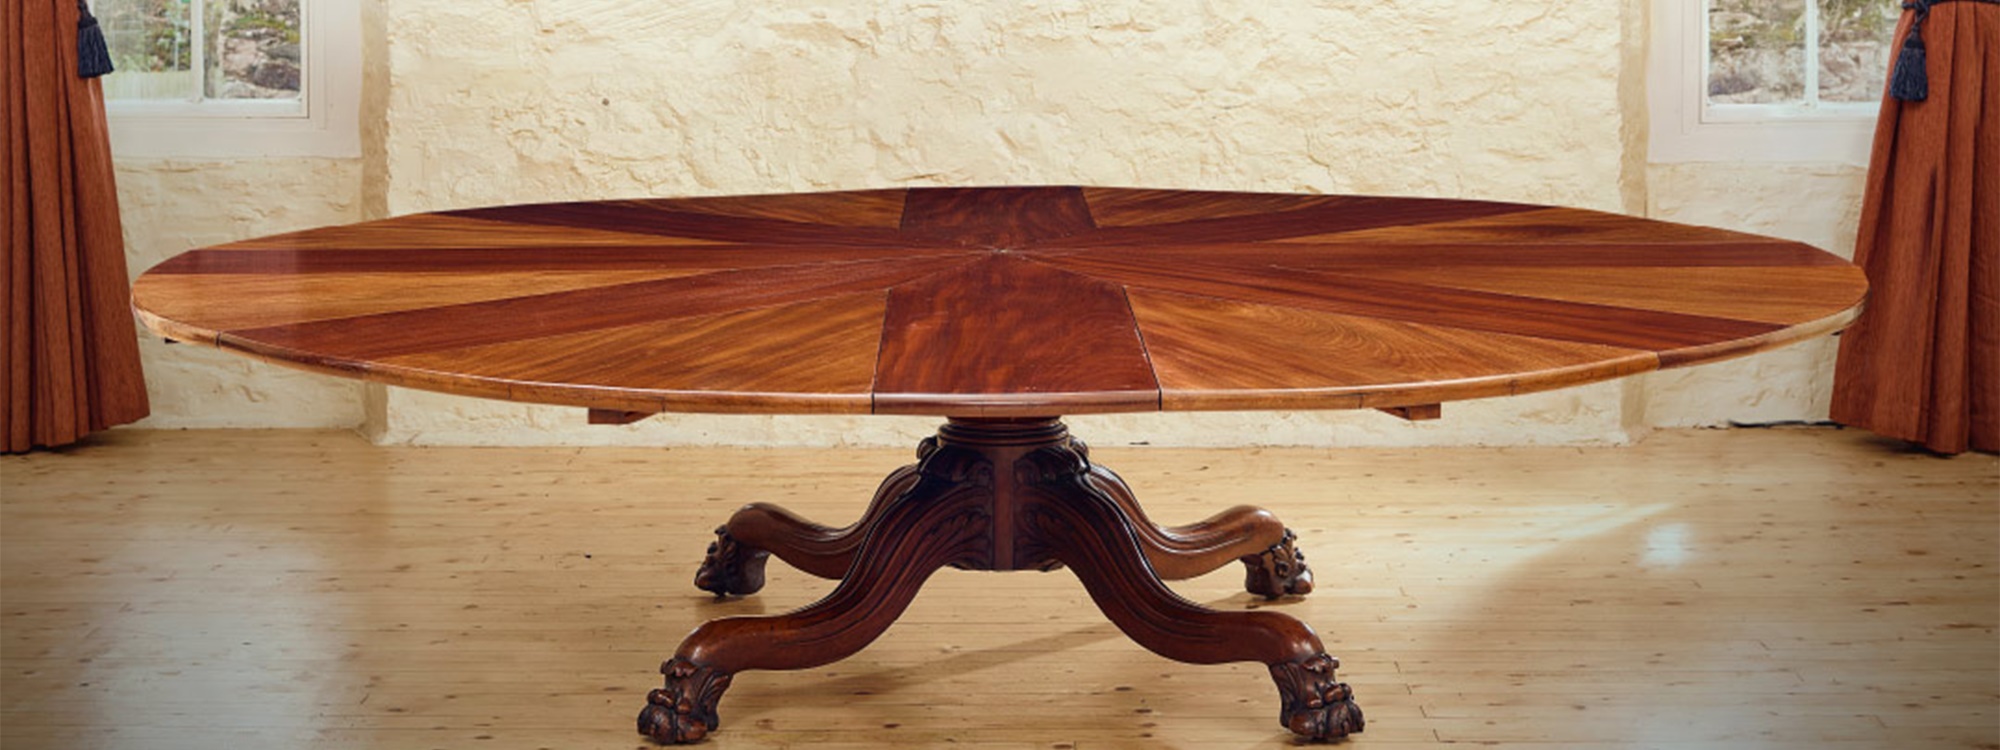 'Jupe's Patent' Extending Dining Table